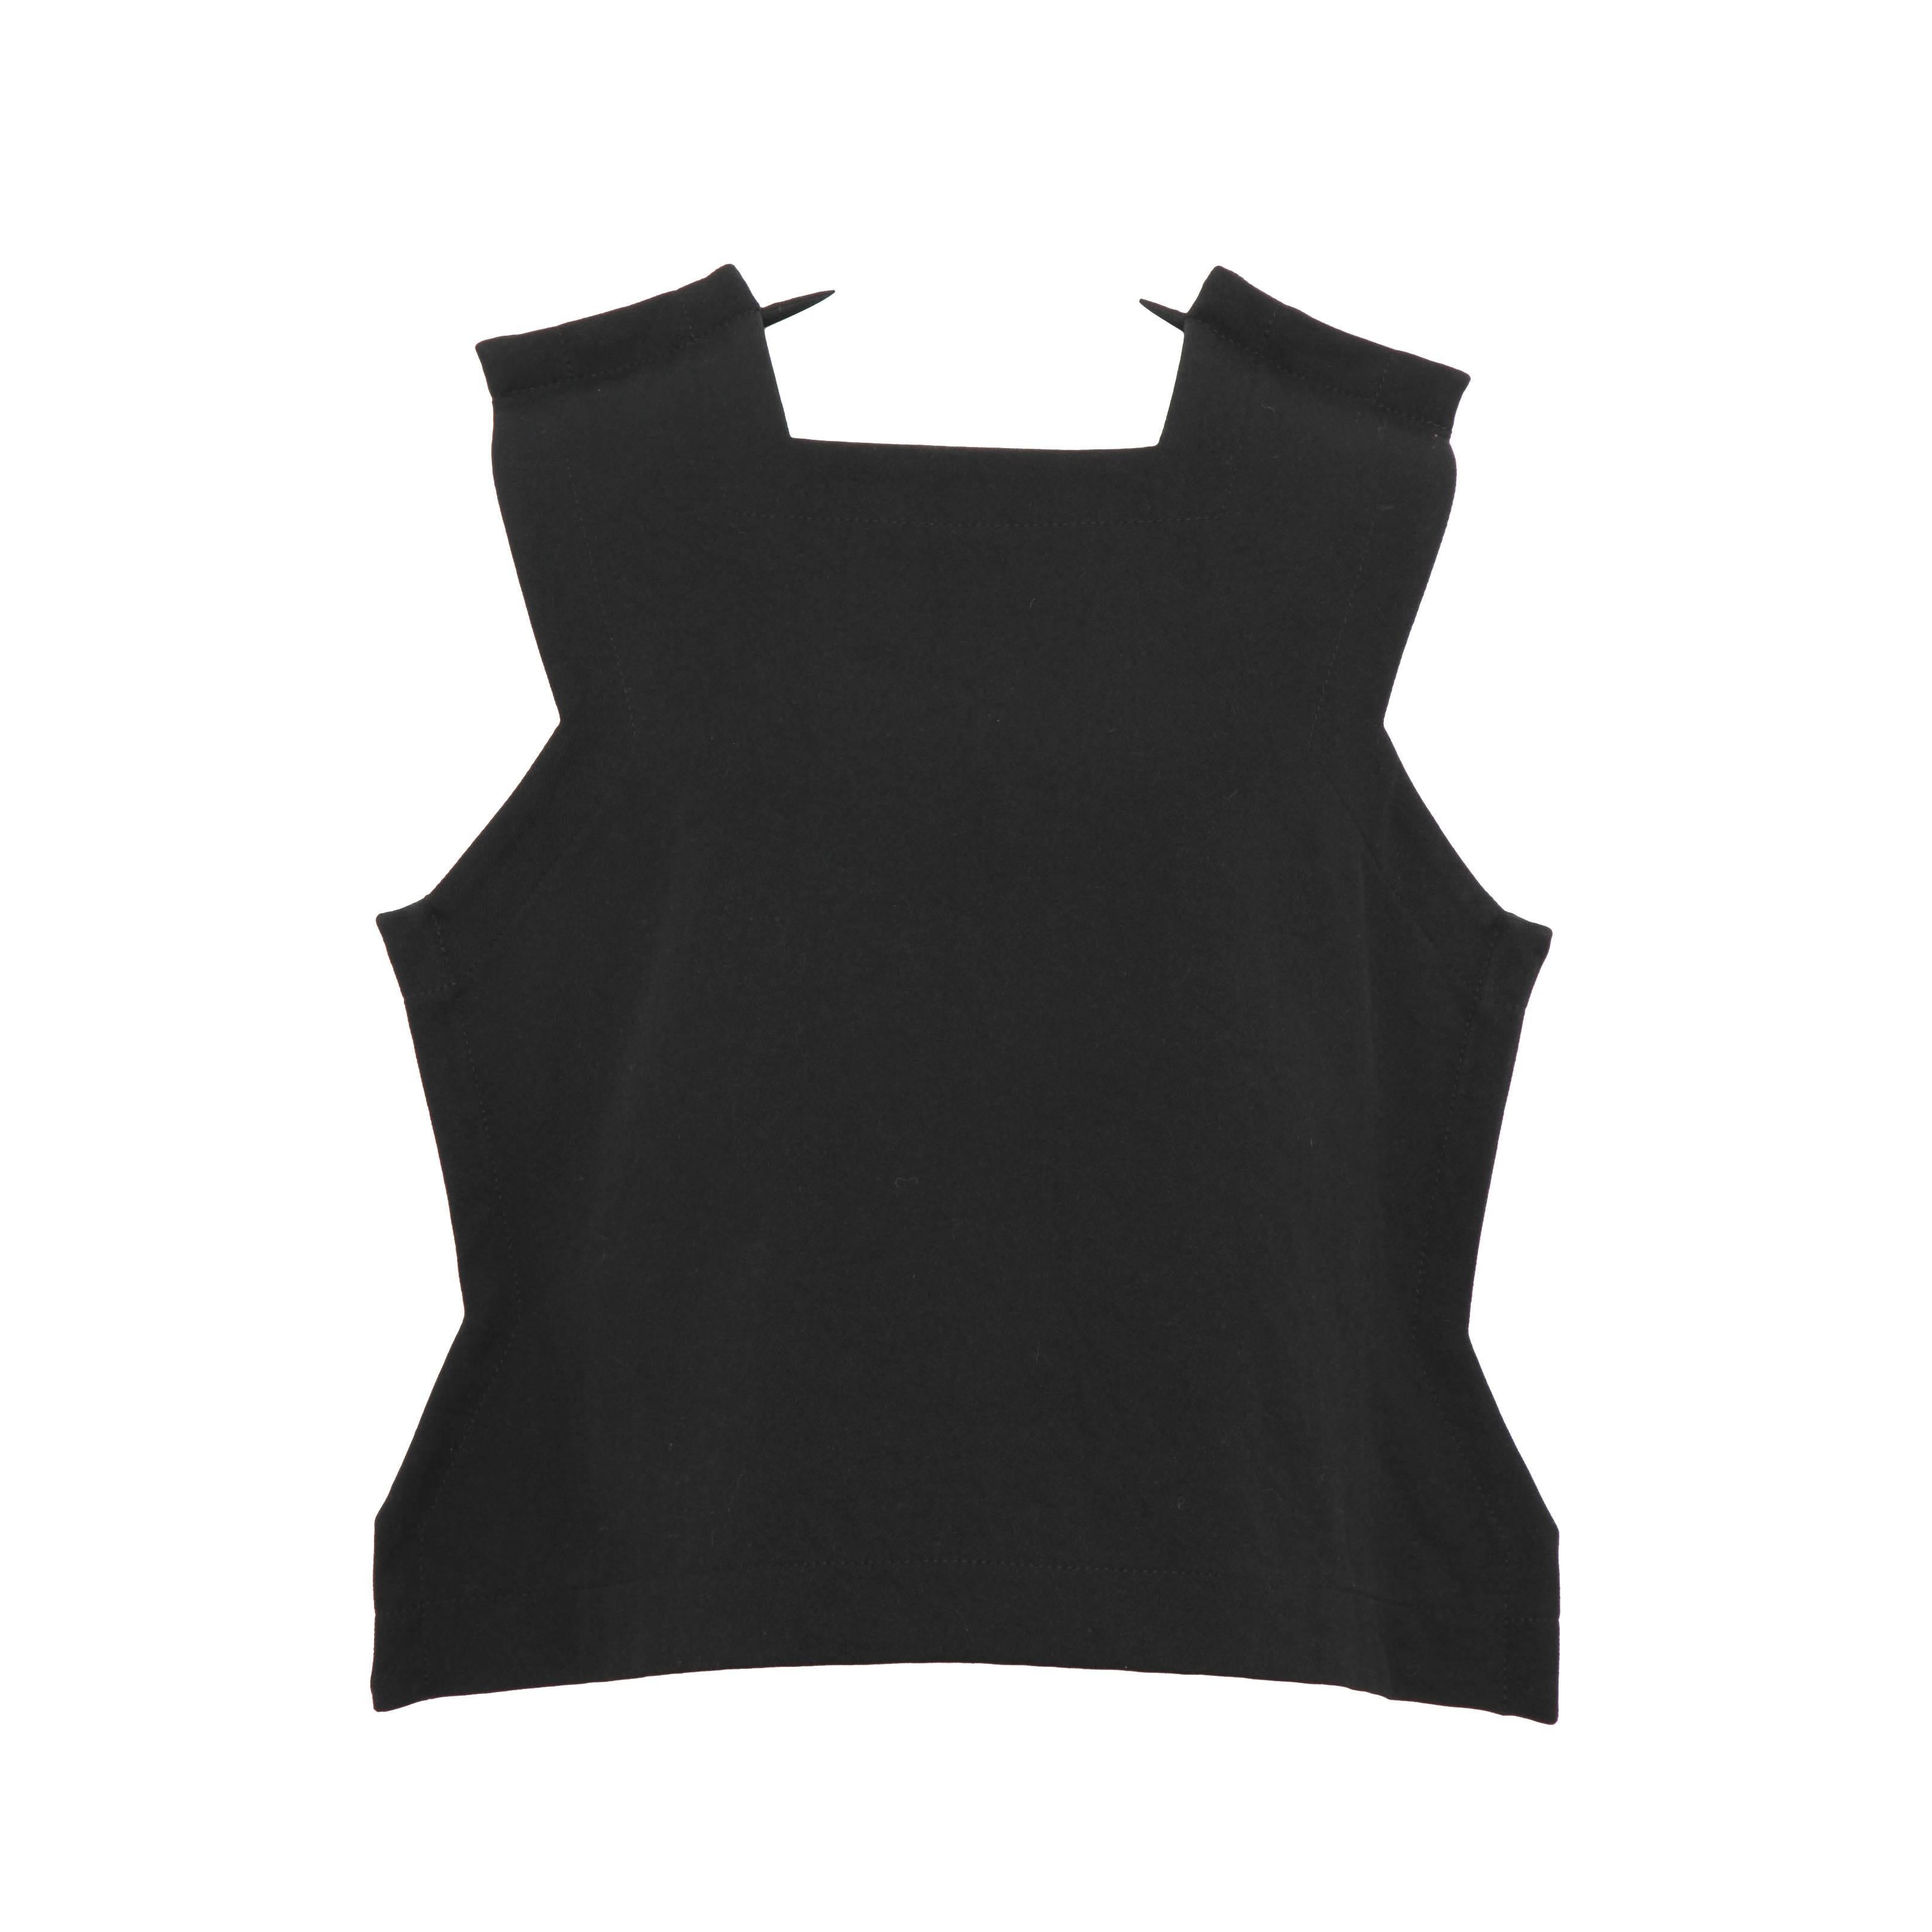 Comme Des Garcons Rare Black Top from 2 Dimensional Collection im Angebot